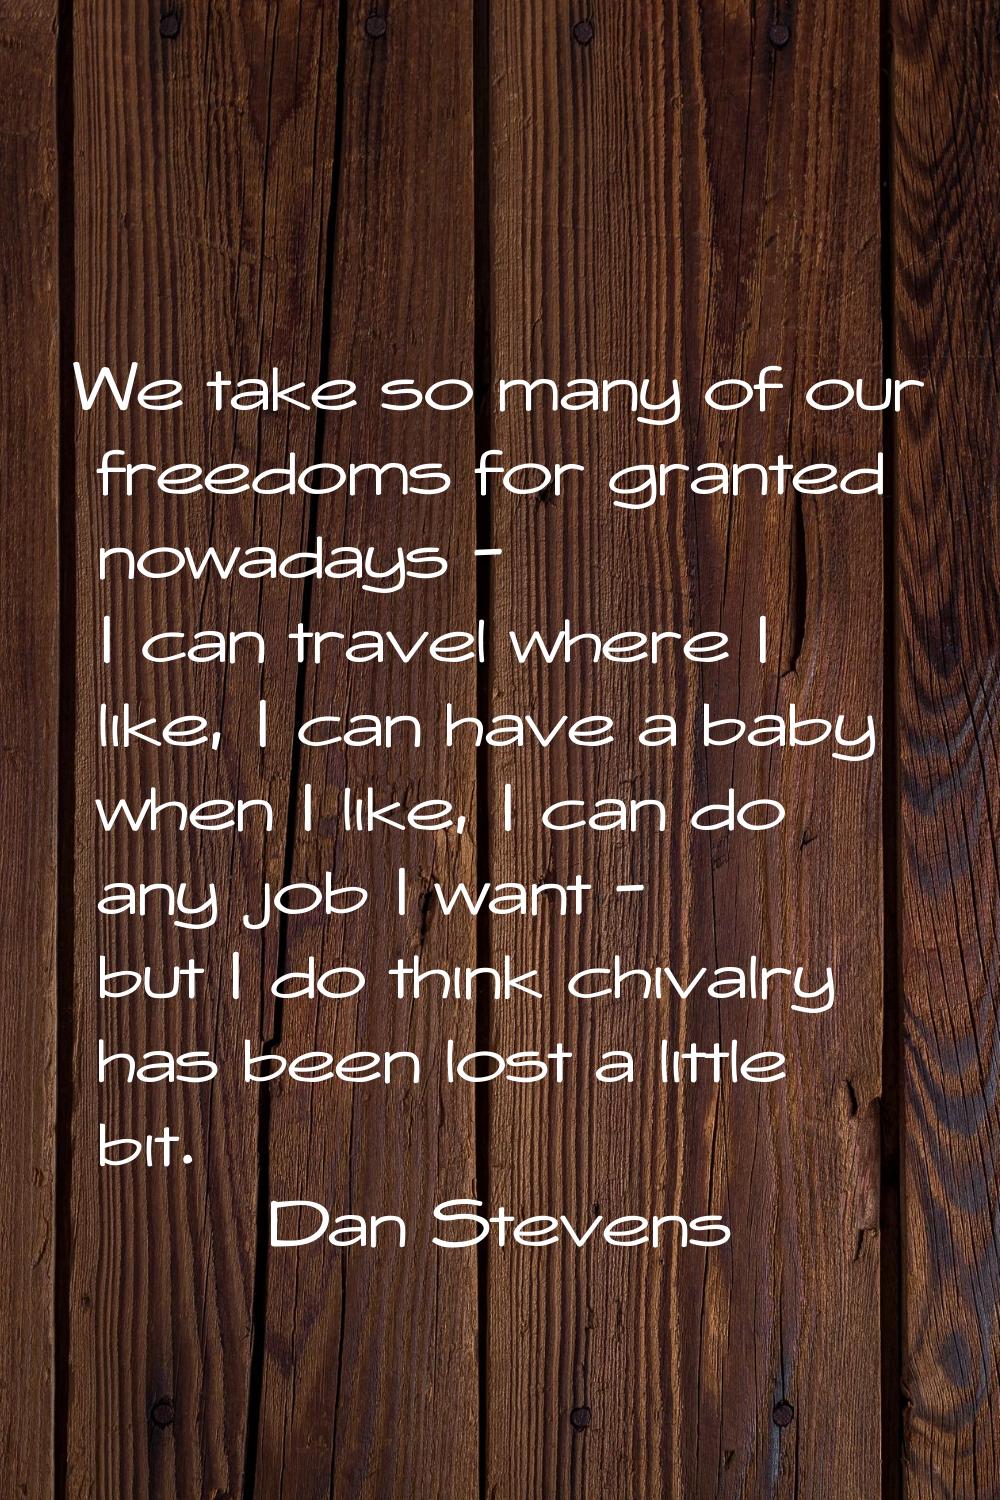 We take so many of our freedoms for granted nowadays - I can travel where I like, I can have a baby